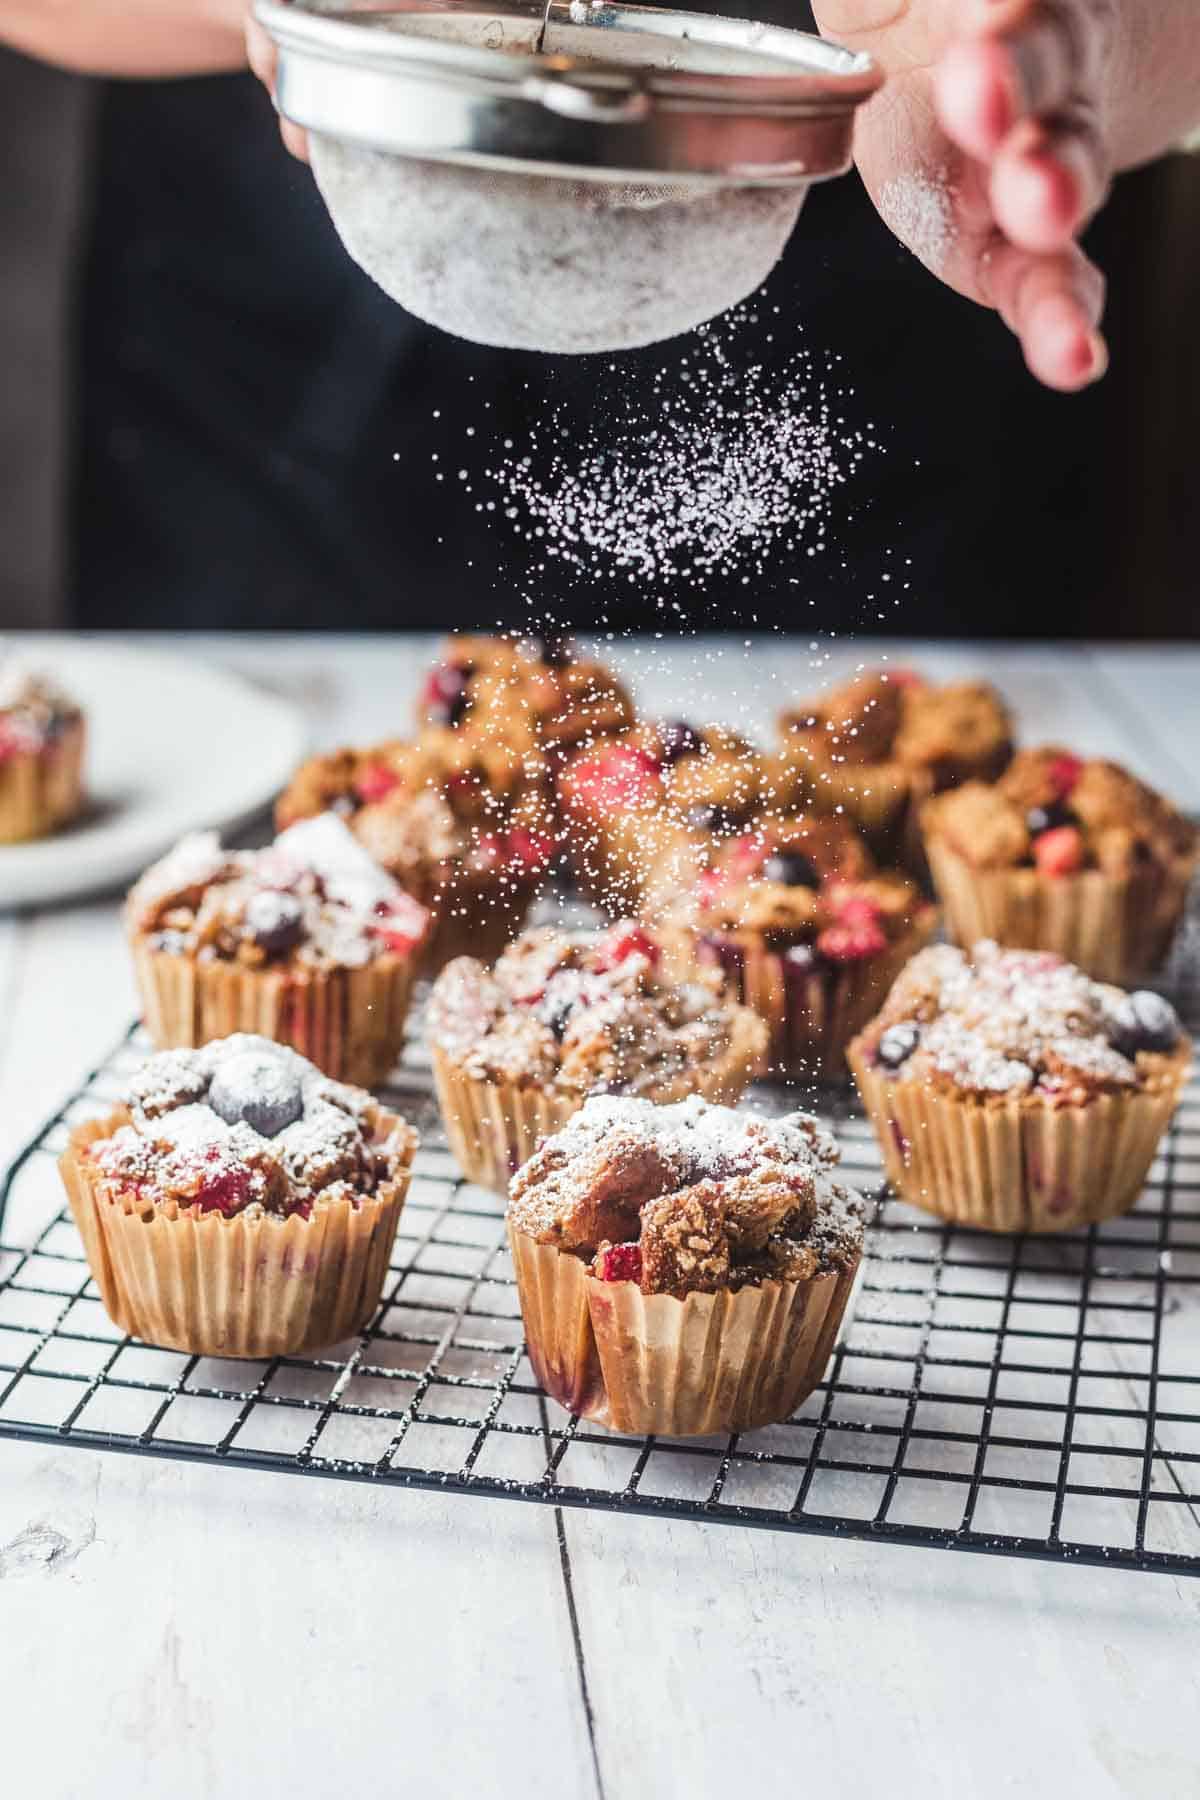 Bread pudding muffins on a cooling rack with powdered sugar being dusted on.